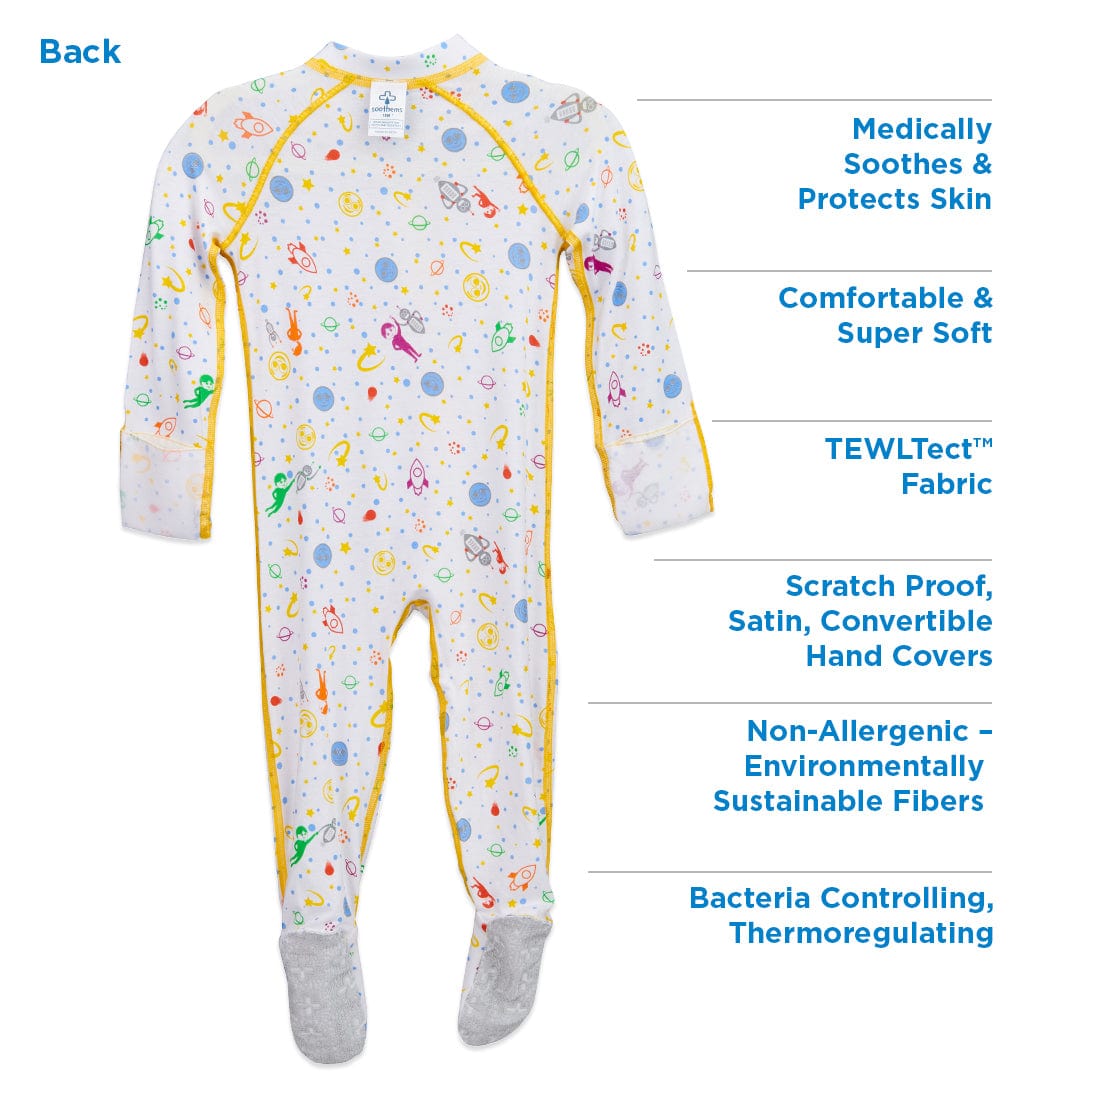 “Atopic Dermatitis Sleepwear and Clothing Stops Scratching from Eczema at Night”